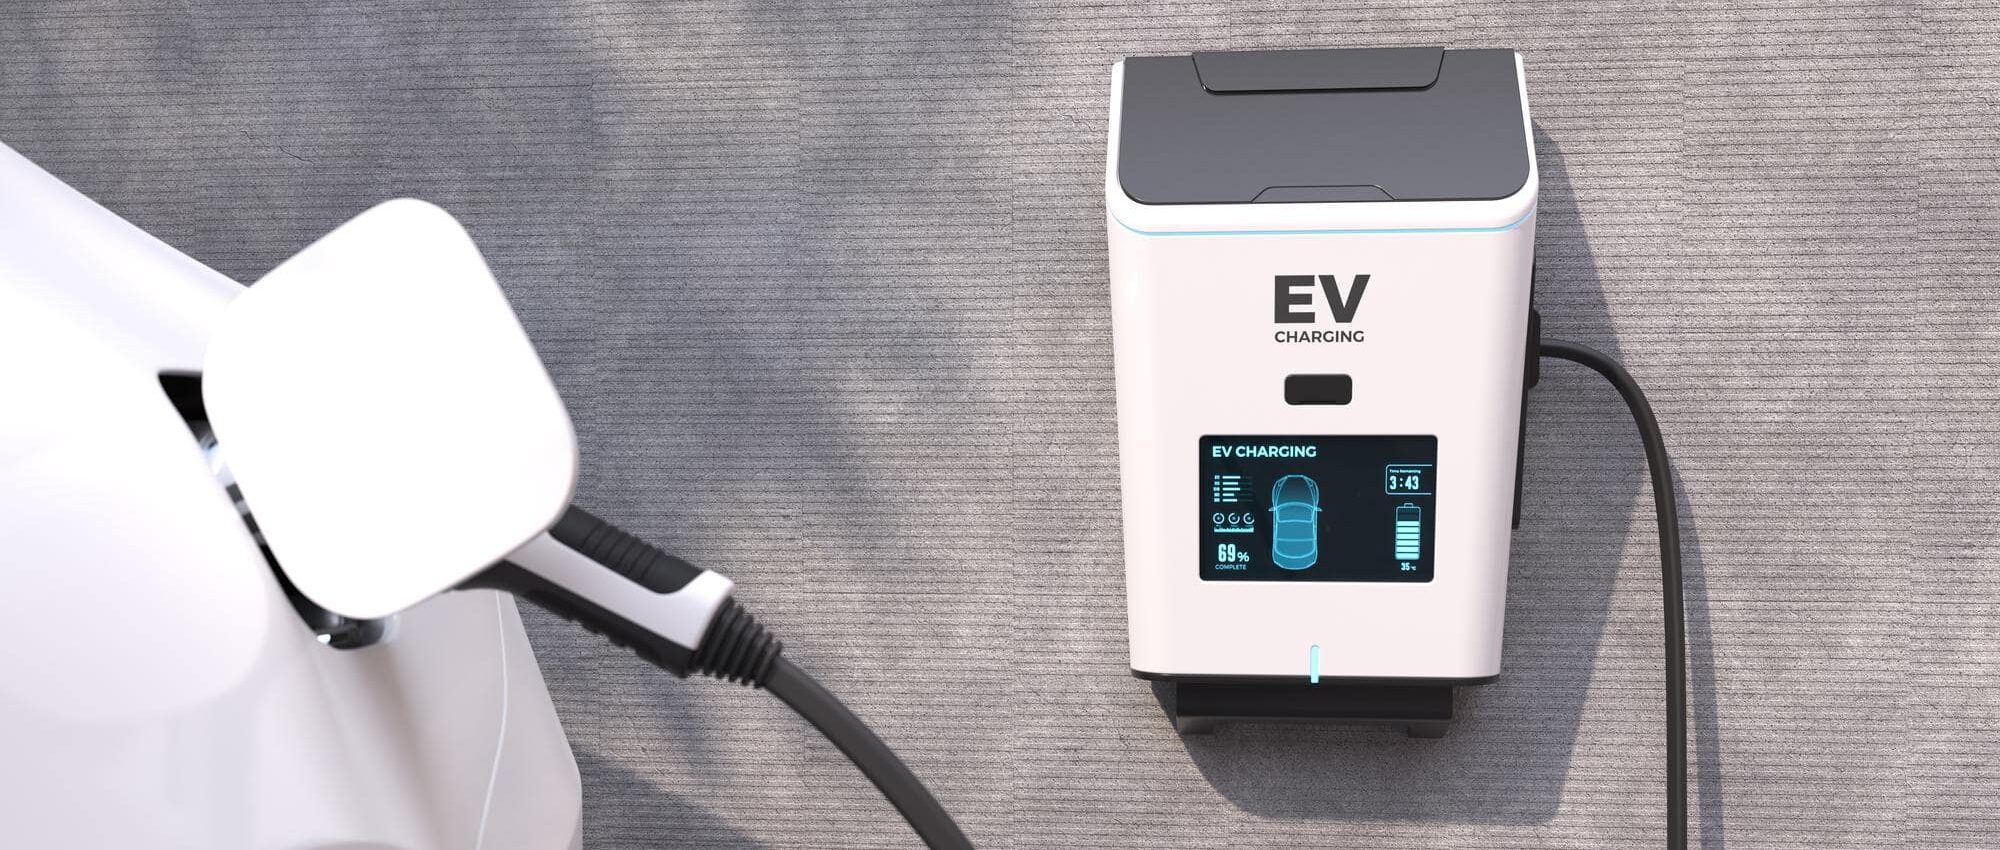 A picture of a Project EV charger